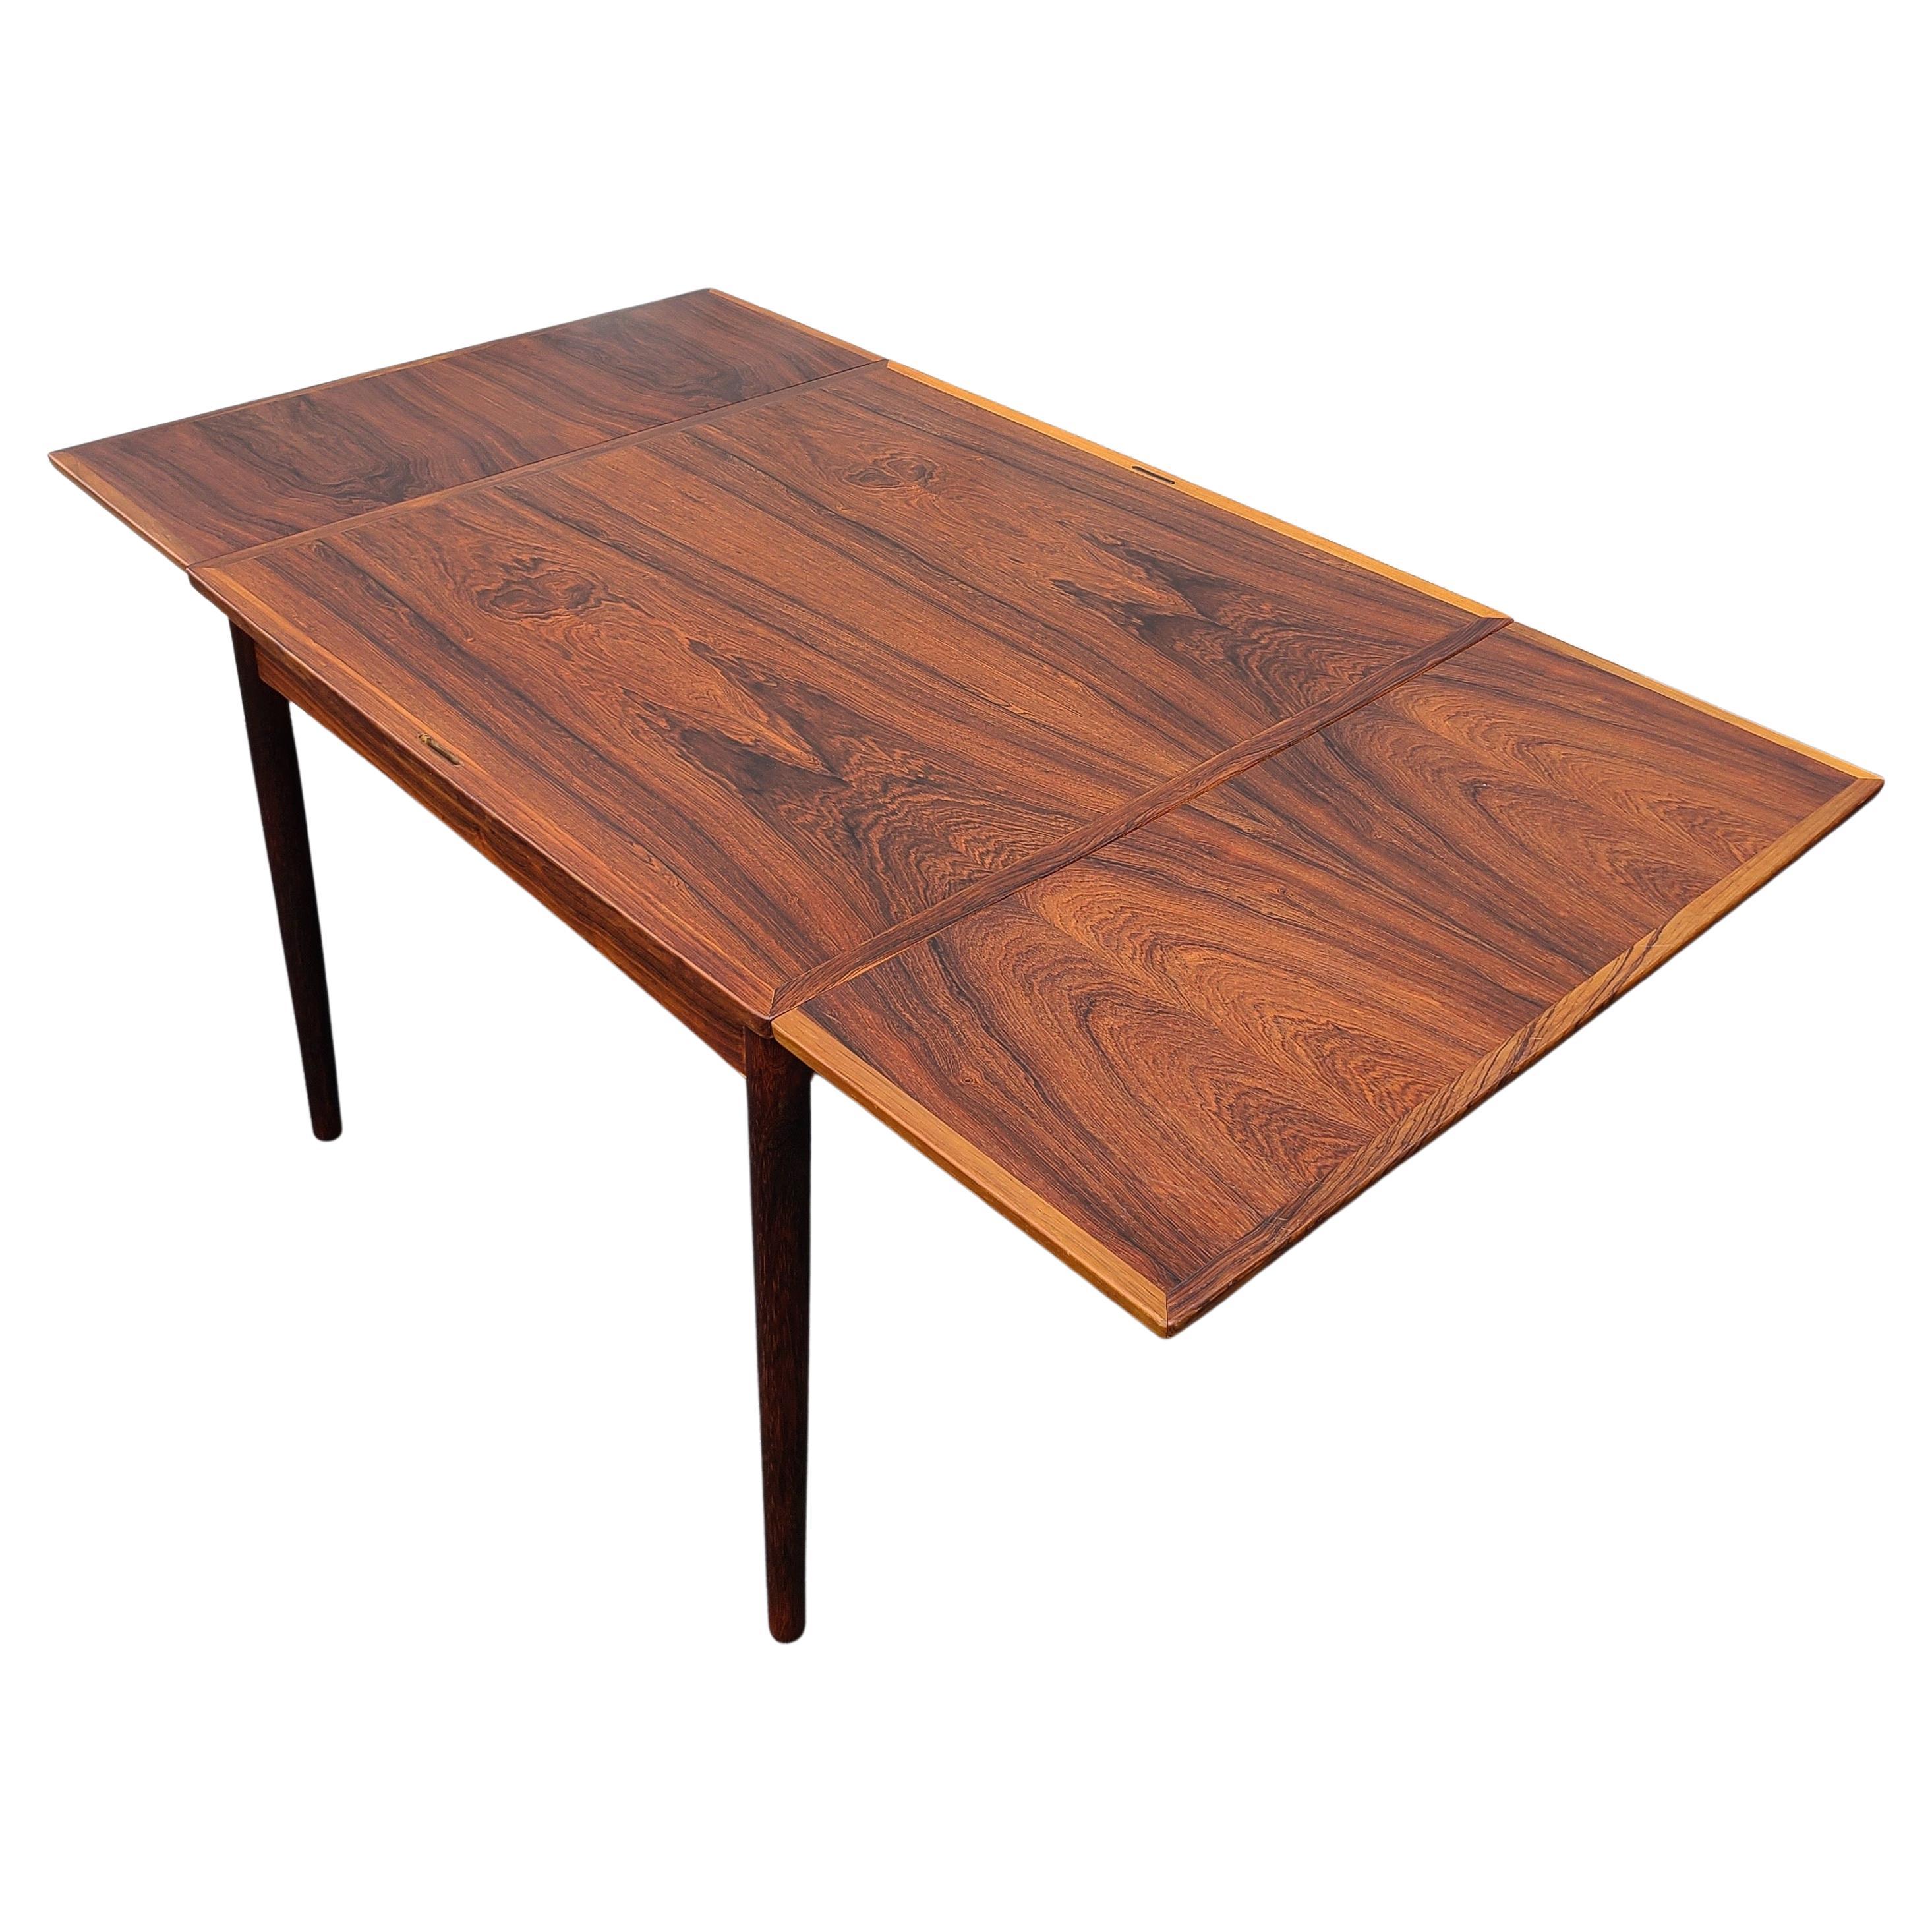 Mid-20th Century Danish Rosewood Leather Dining Table Carlo Jensen for Poul Hundevad